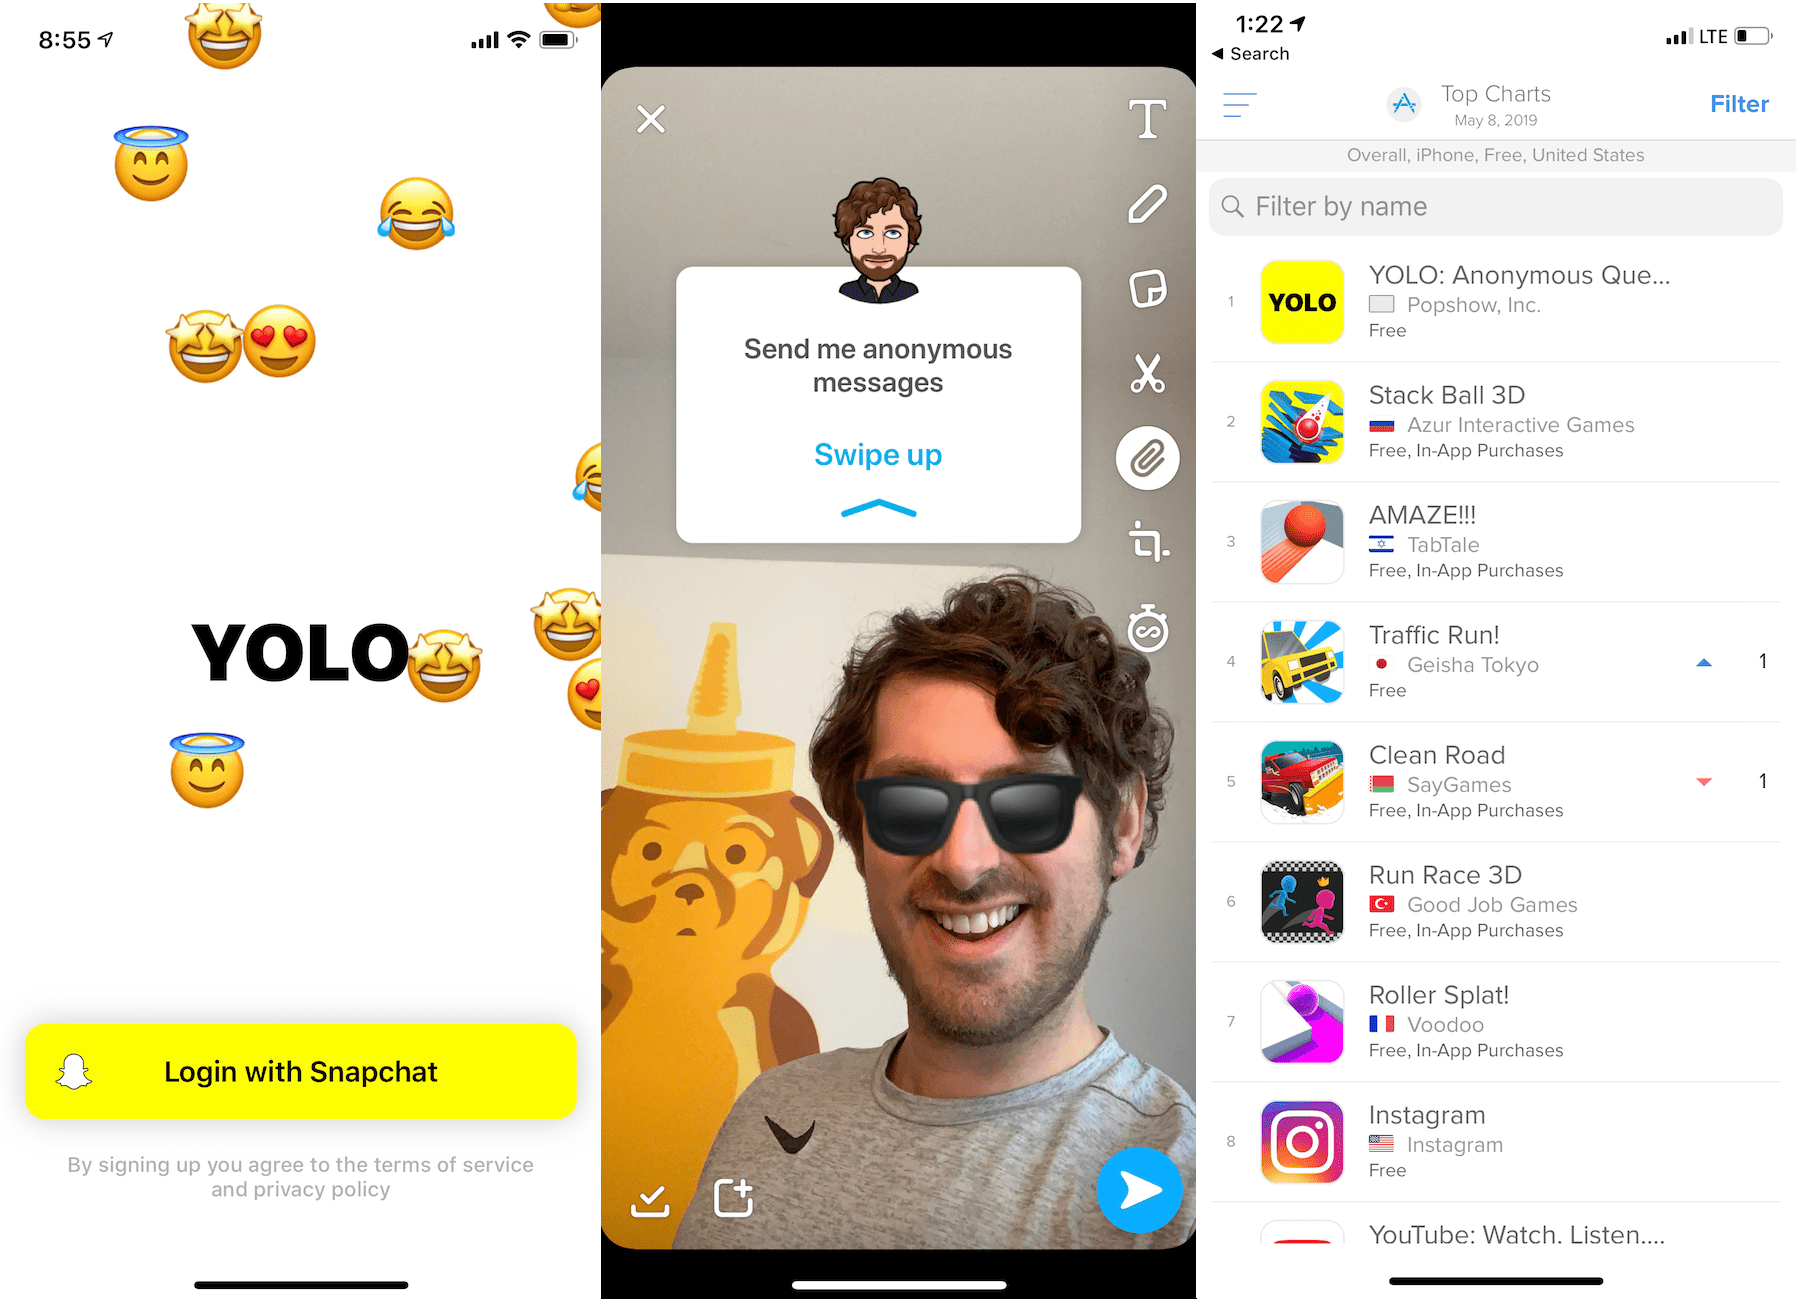 #1 app YOLO Q&A is the Snapchat platform’s 1st hit.